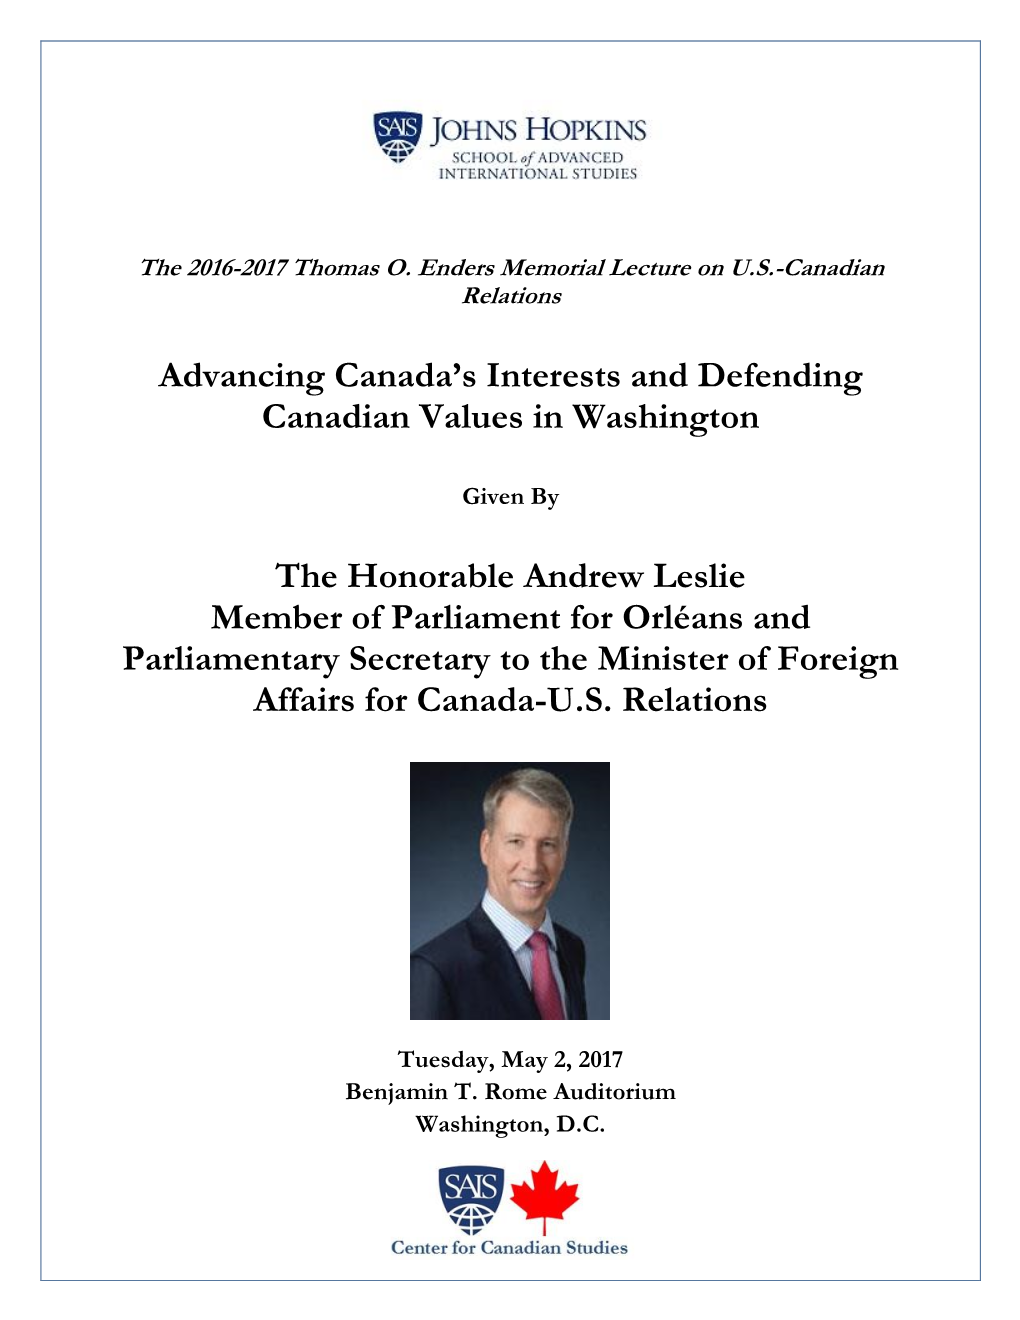 Advancing Canada's Interests and Defending Canadian Values in Washington the Honorable Andrew Leslie Member of Parliament